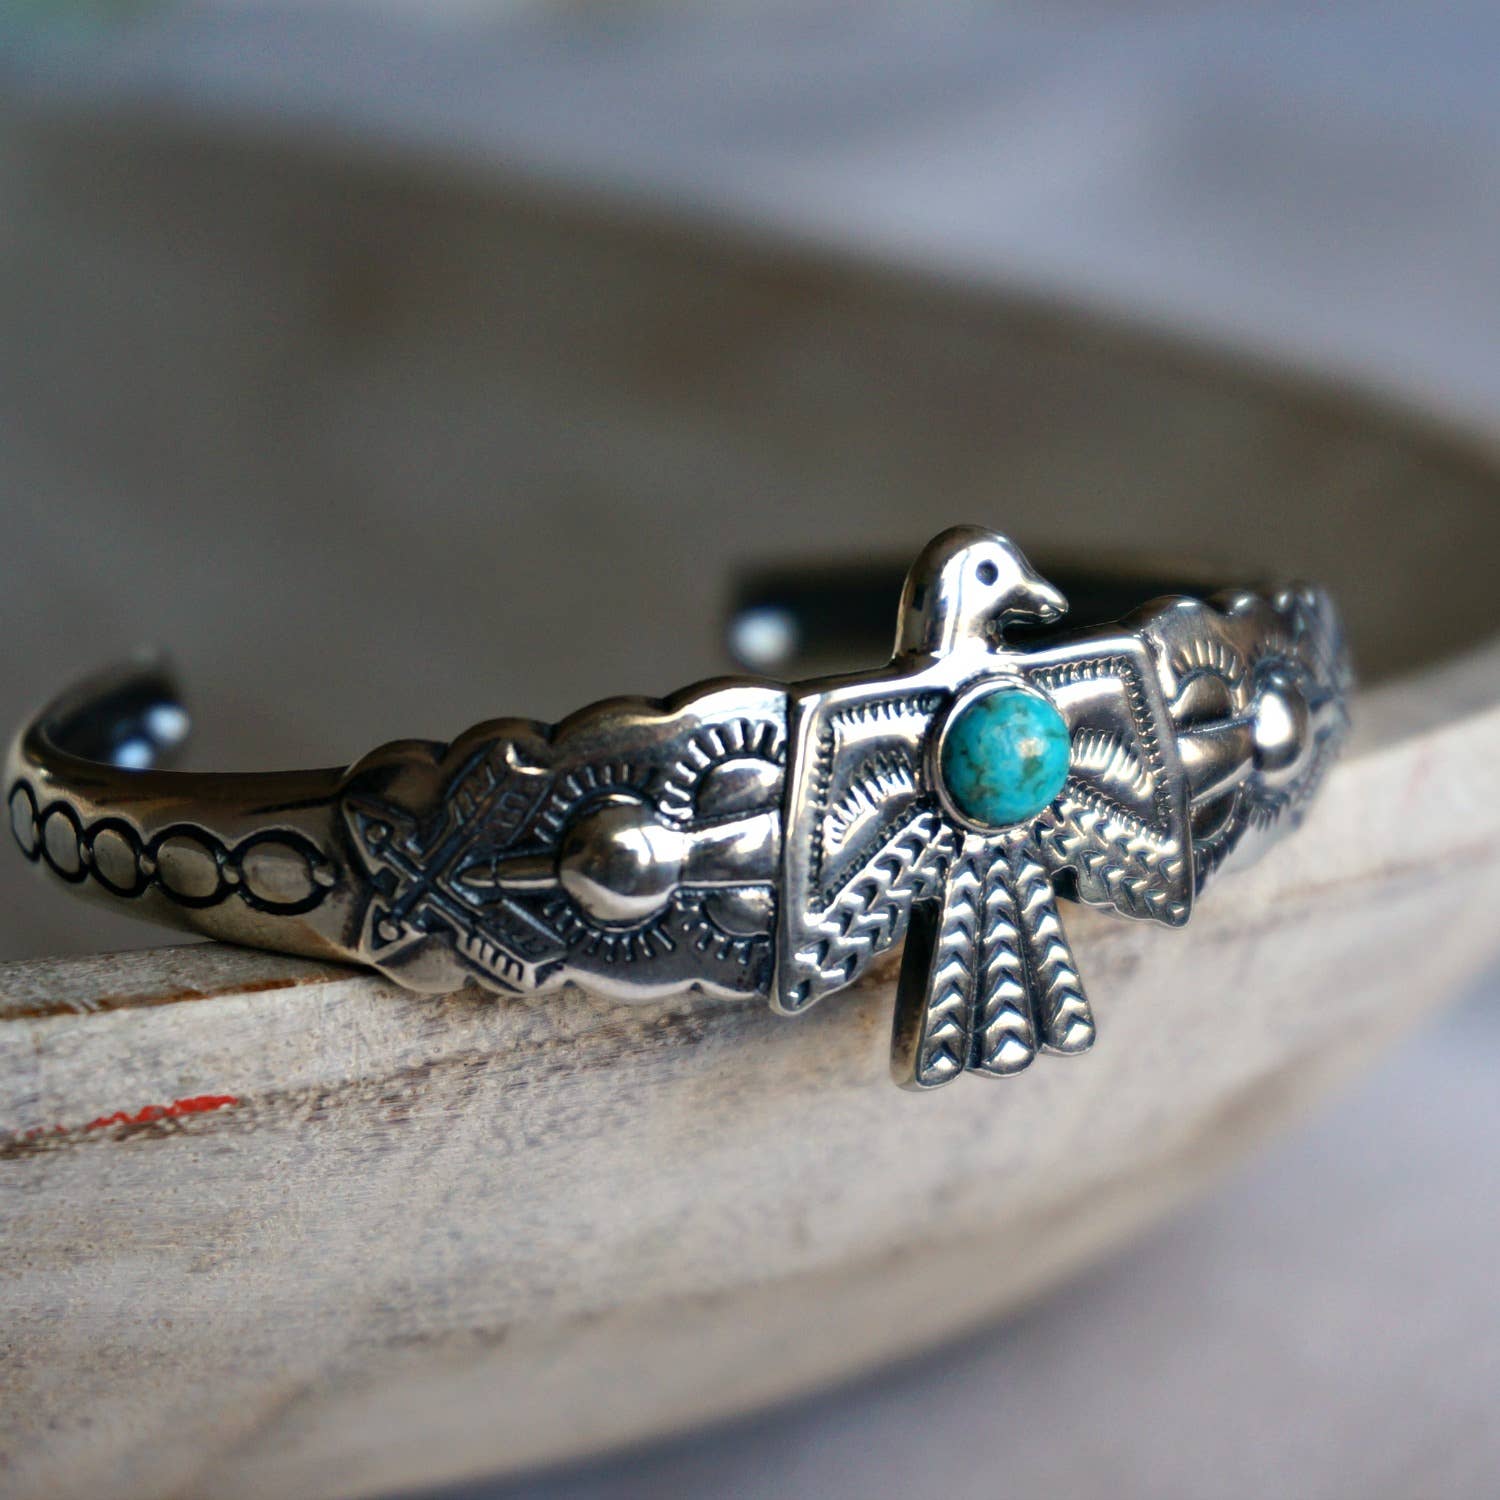 Slim detailed Sterling silver cuff w/ Thunderbird design and one Turquoise stone inlay set against a grey background